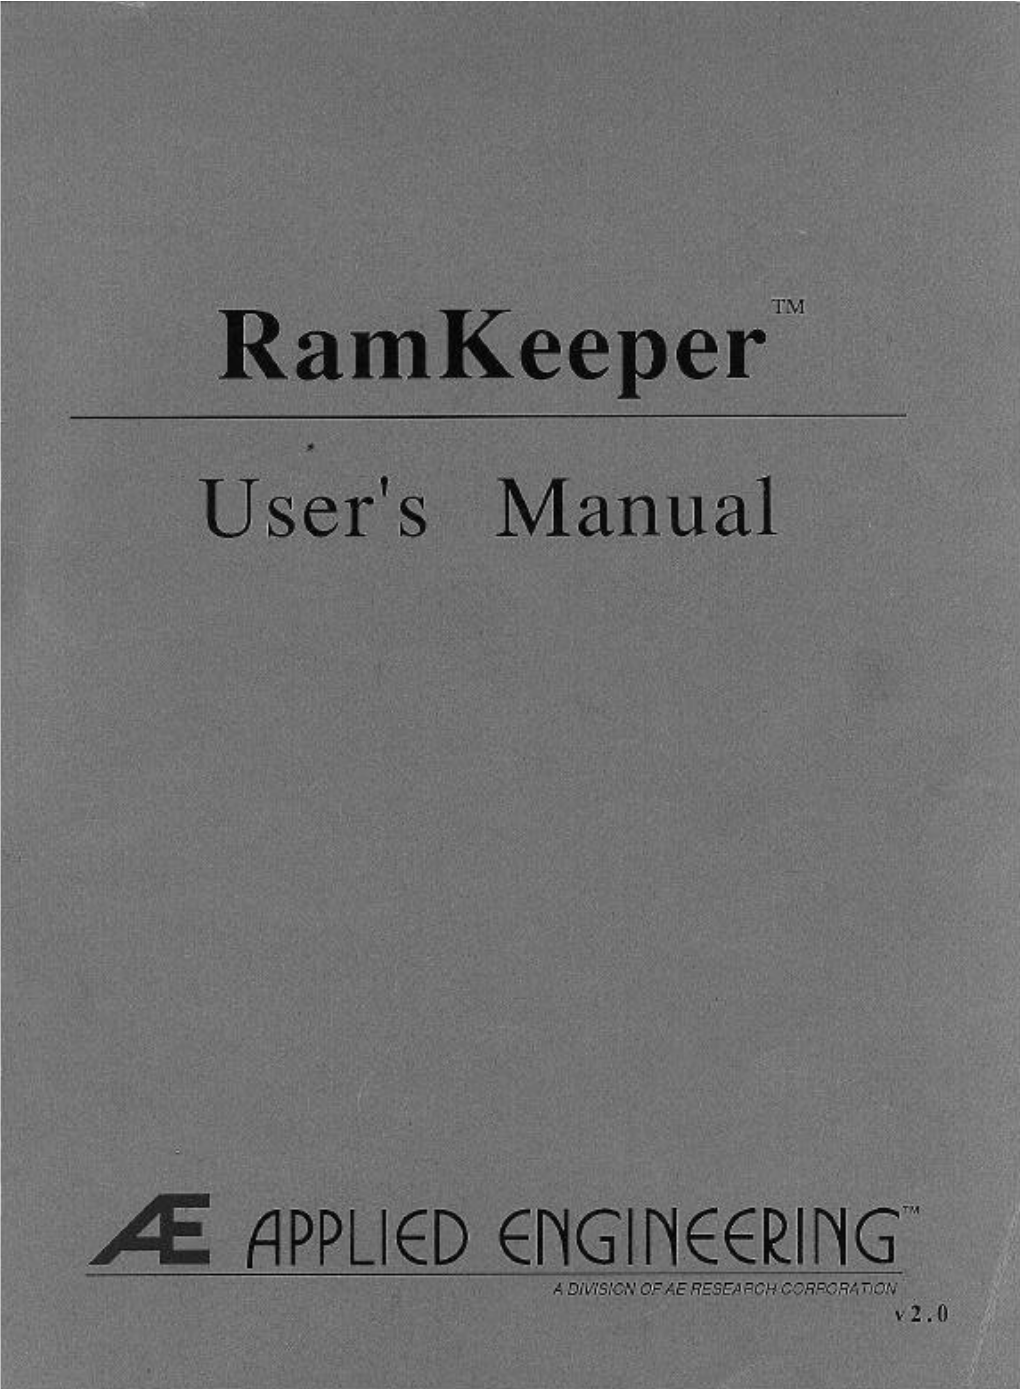 ROM Disk Memory Test 24 RAM Memory Test 25 Memory Map 26 Checksum 27 About Ramkeeper